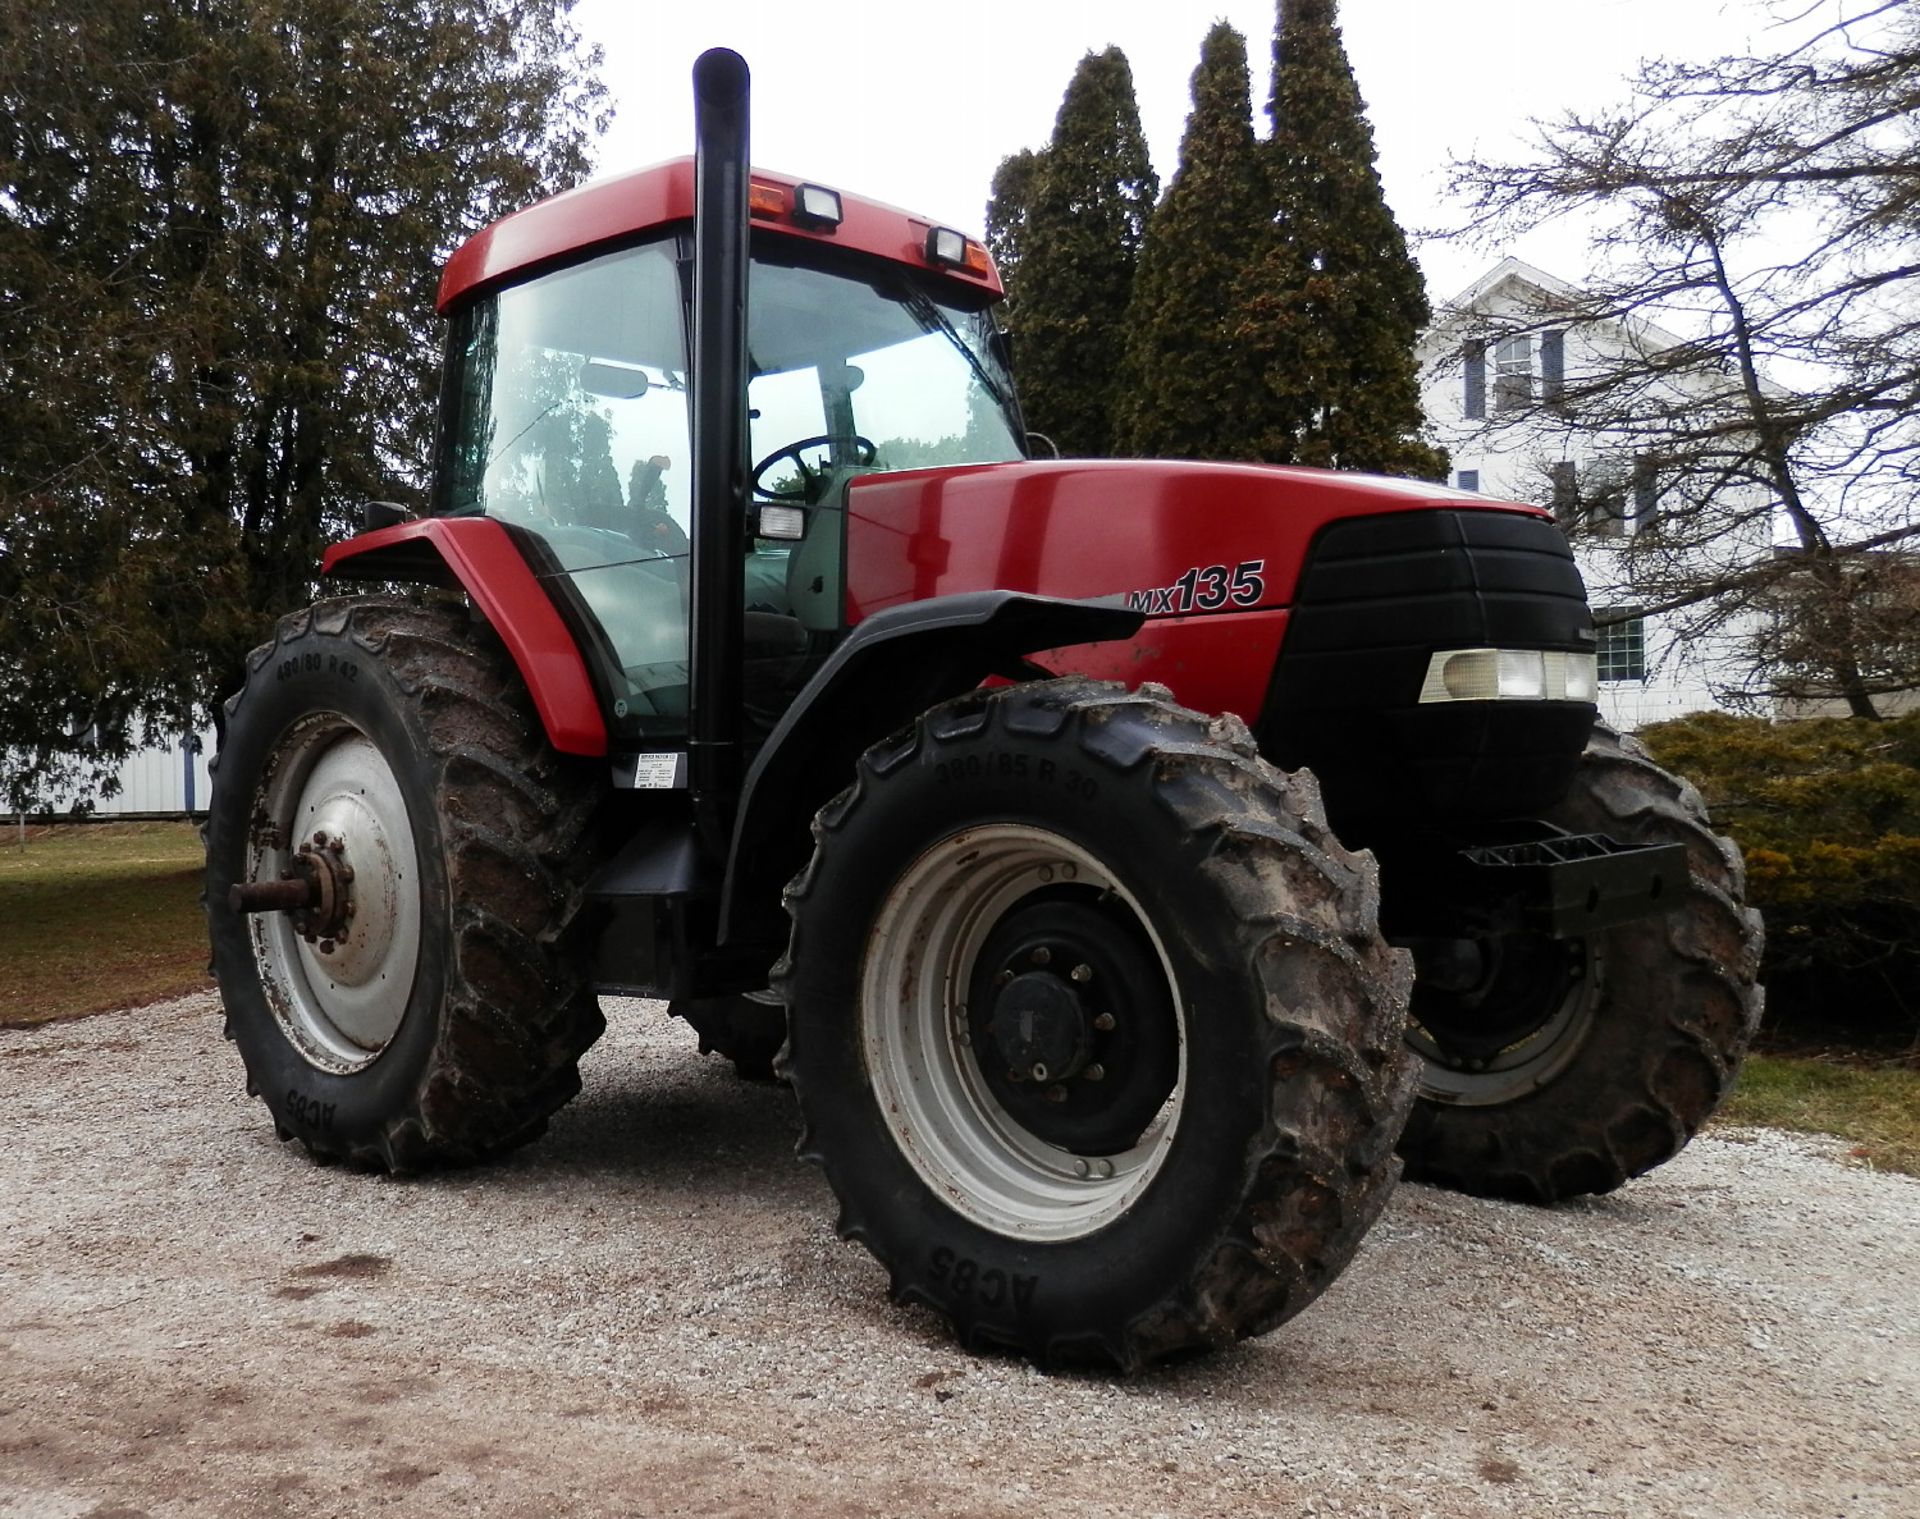 CASE IH MX 135 MFWD TRACTOR - Image 3 of 11